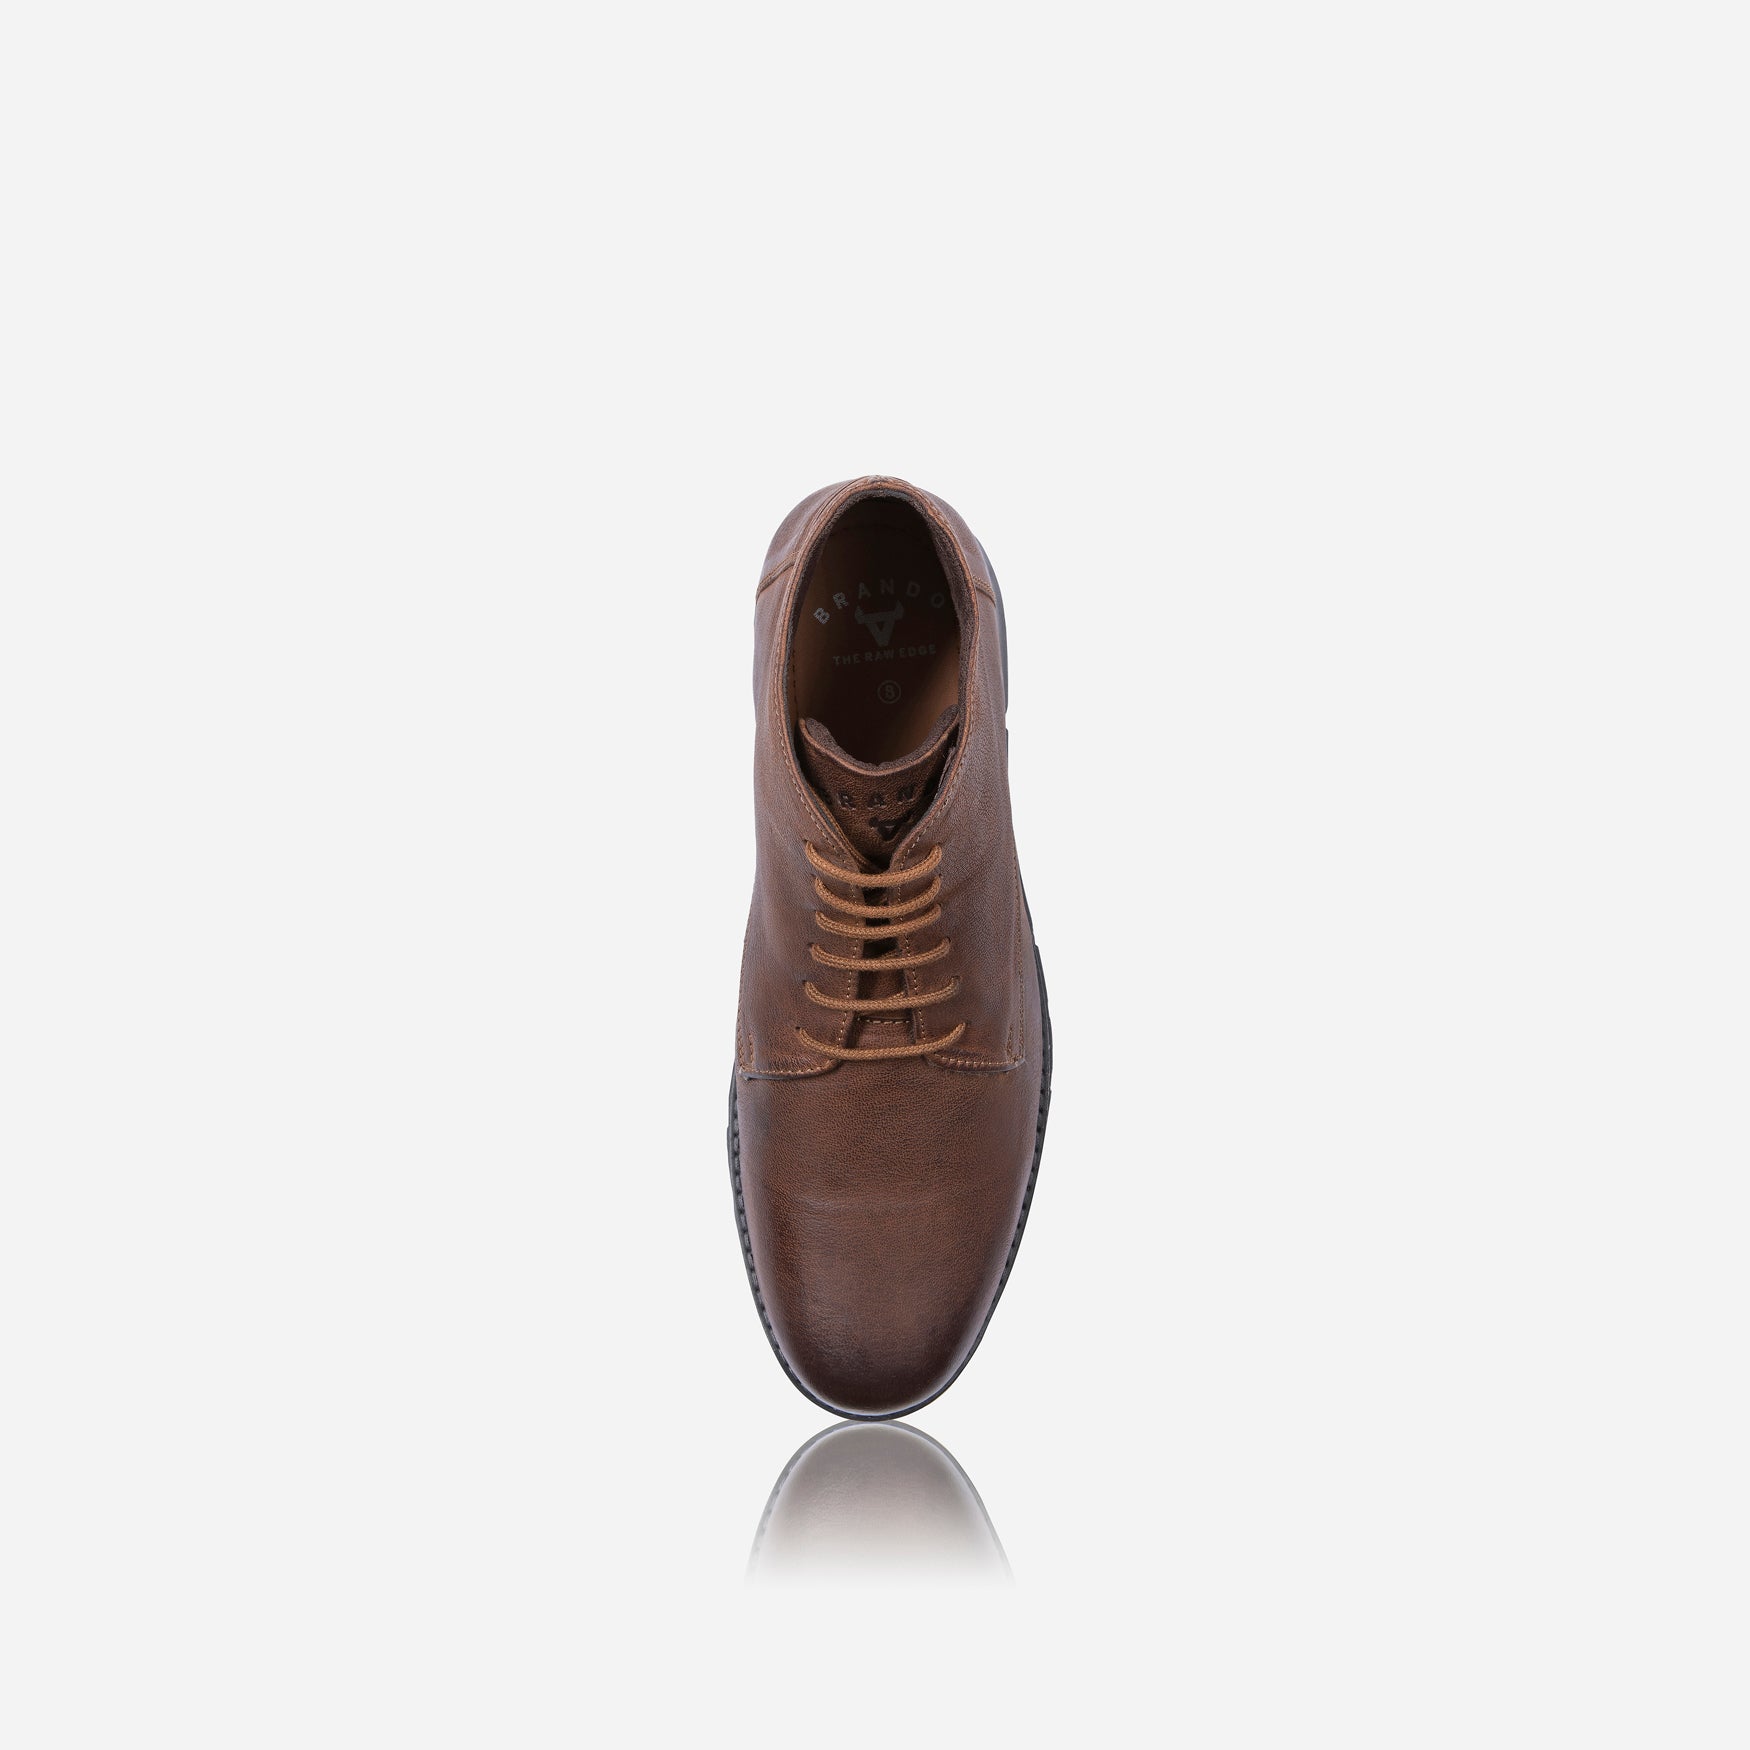 Tuskey Lace Boot - Tobacco - Leather Shoes | Brando Leather South Africa